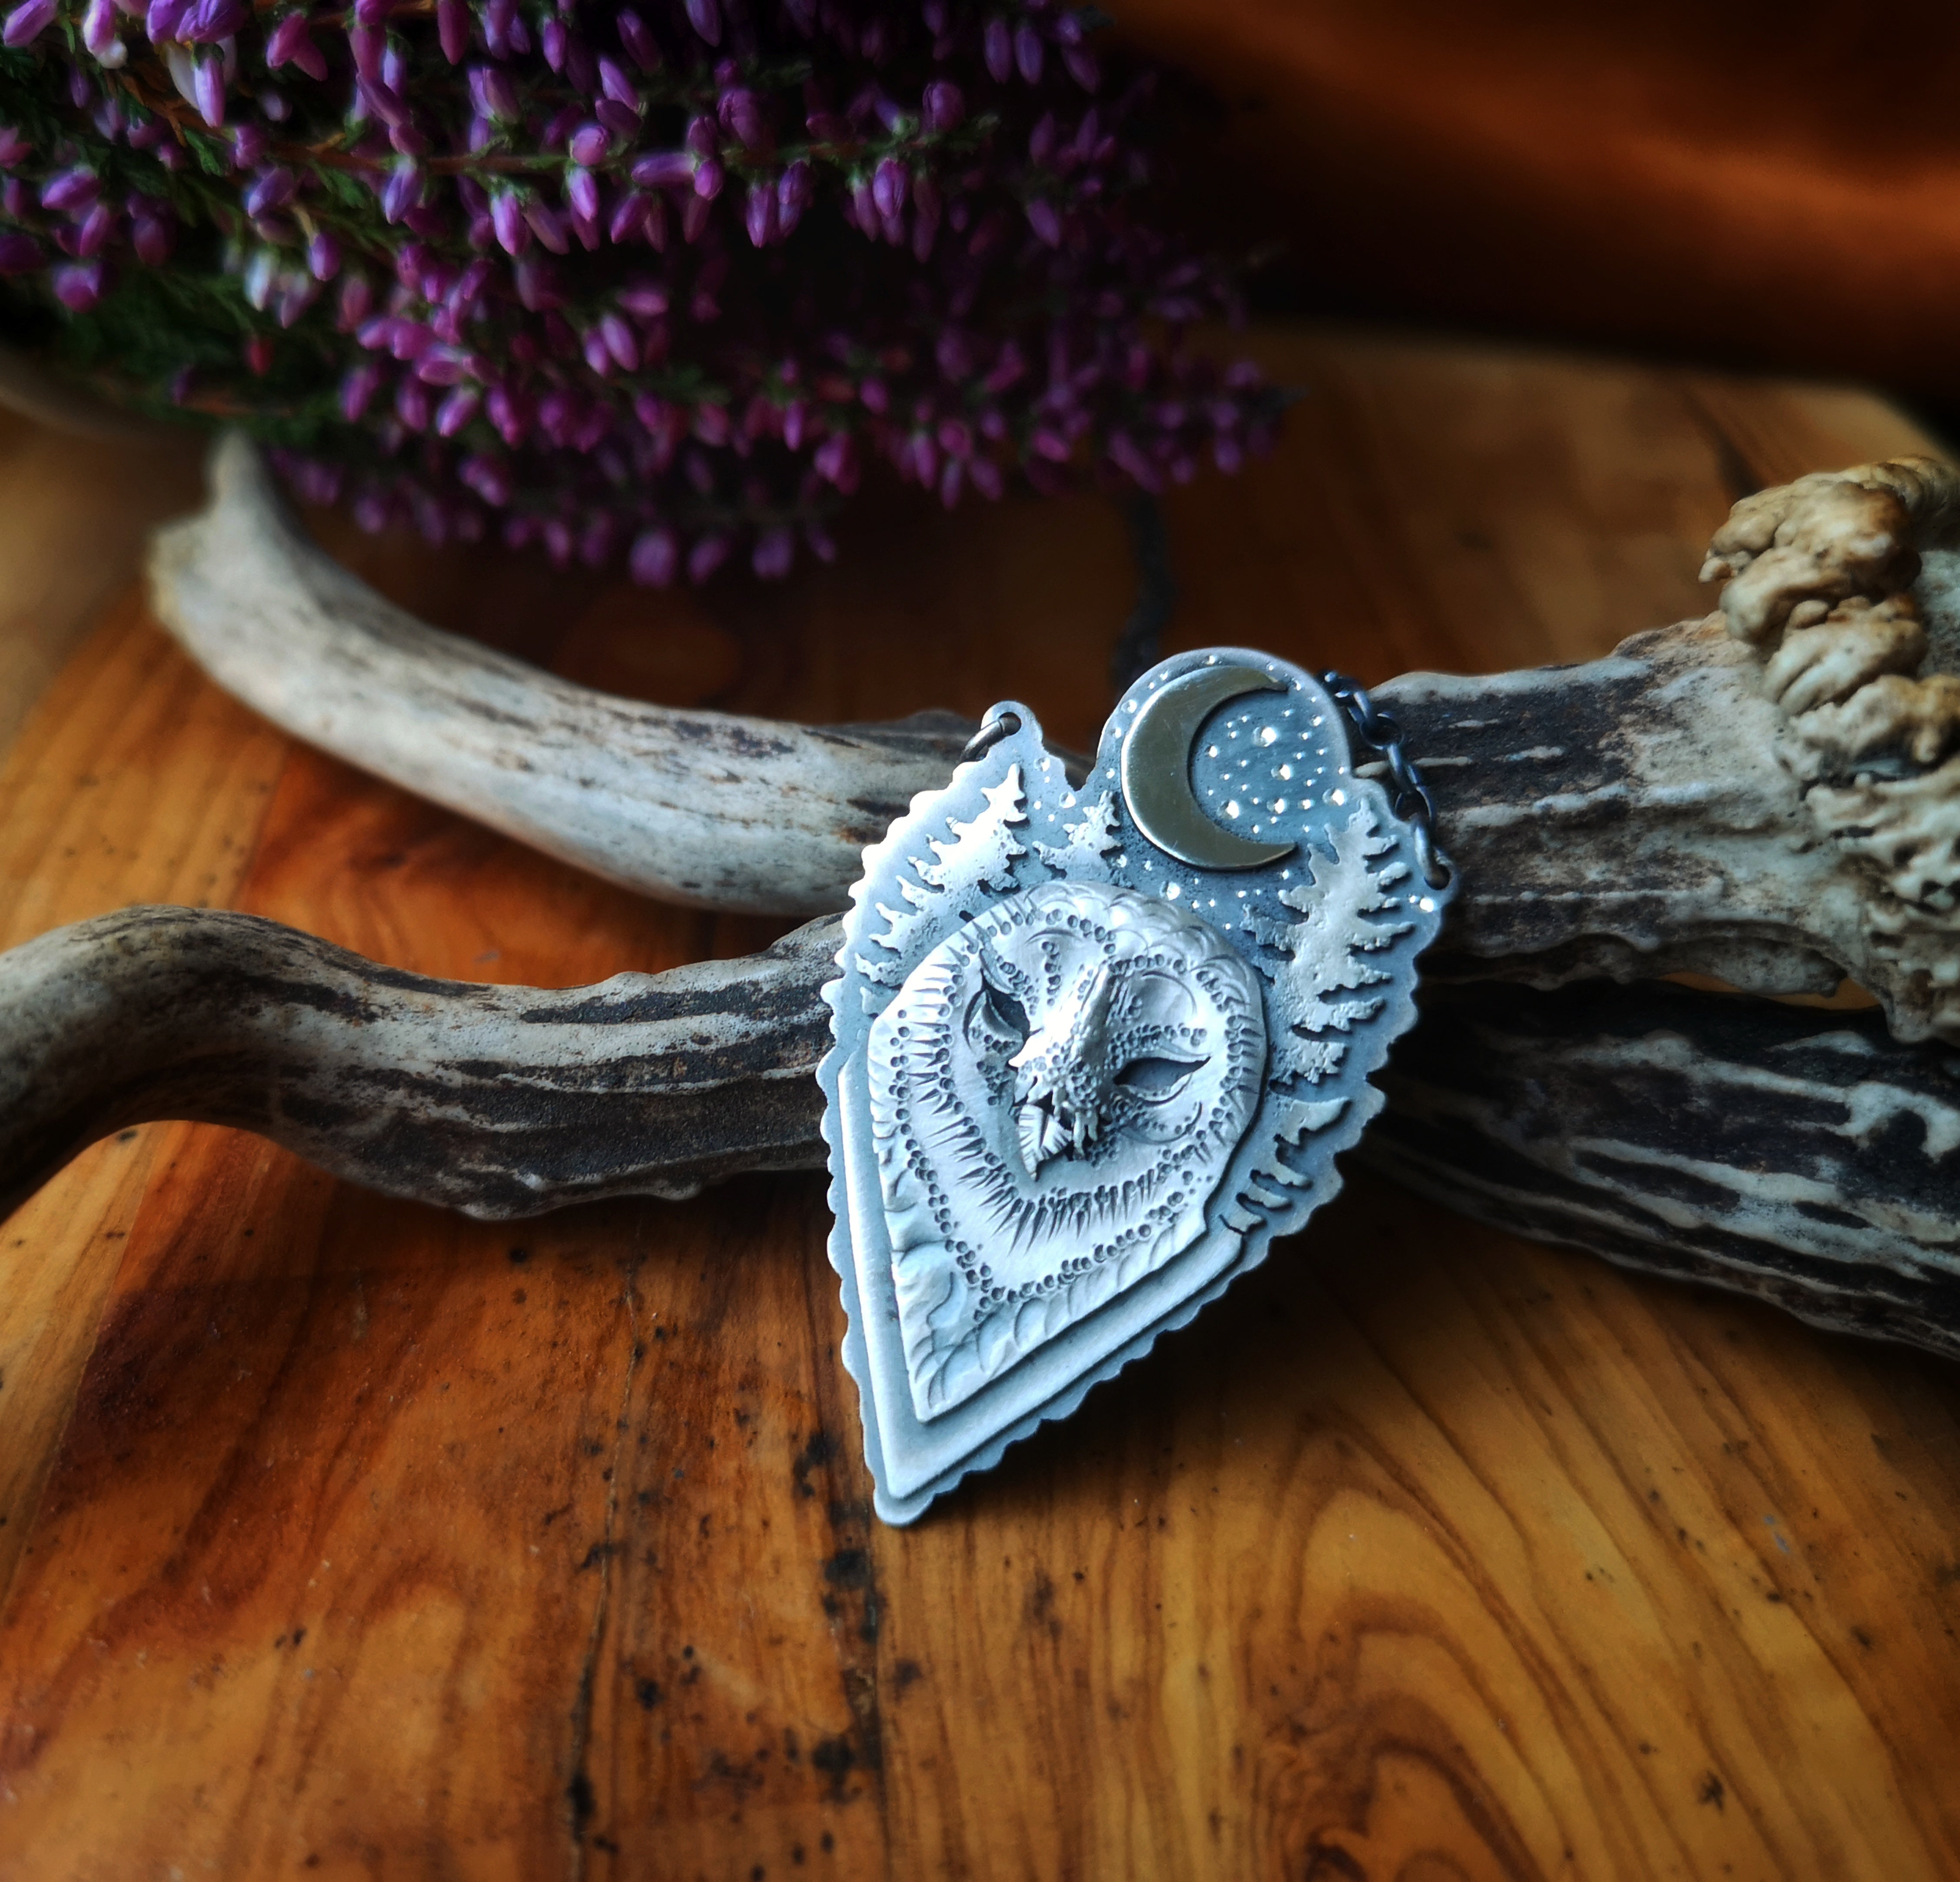 The Barn Owl Necklace - Totem Owl Necklace